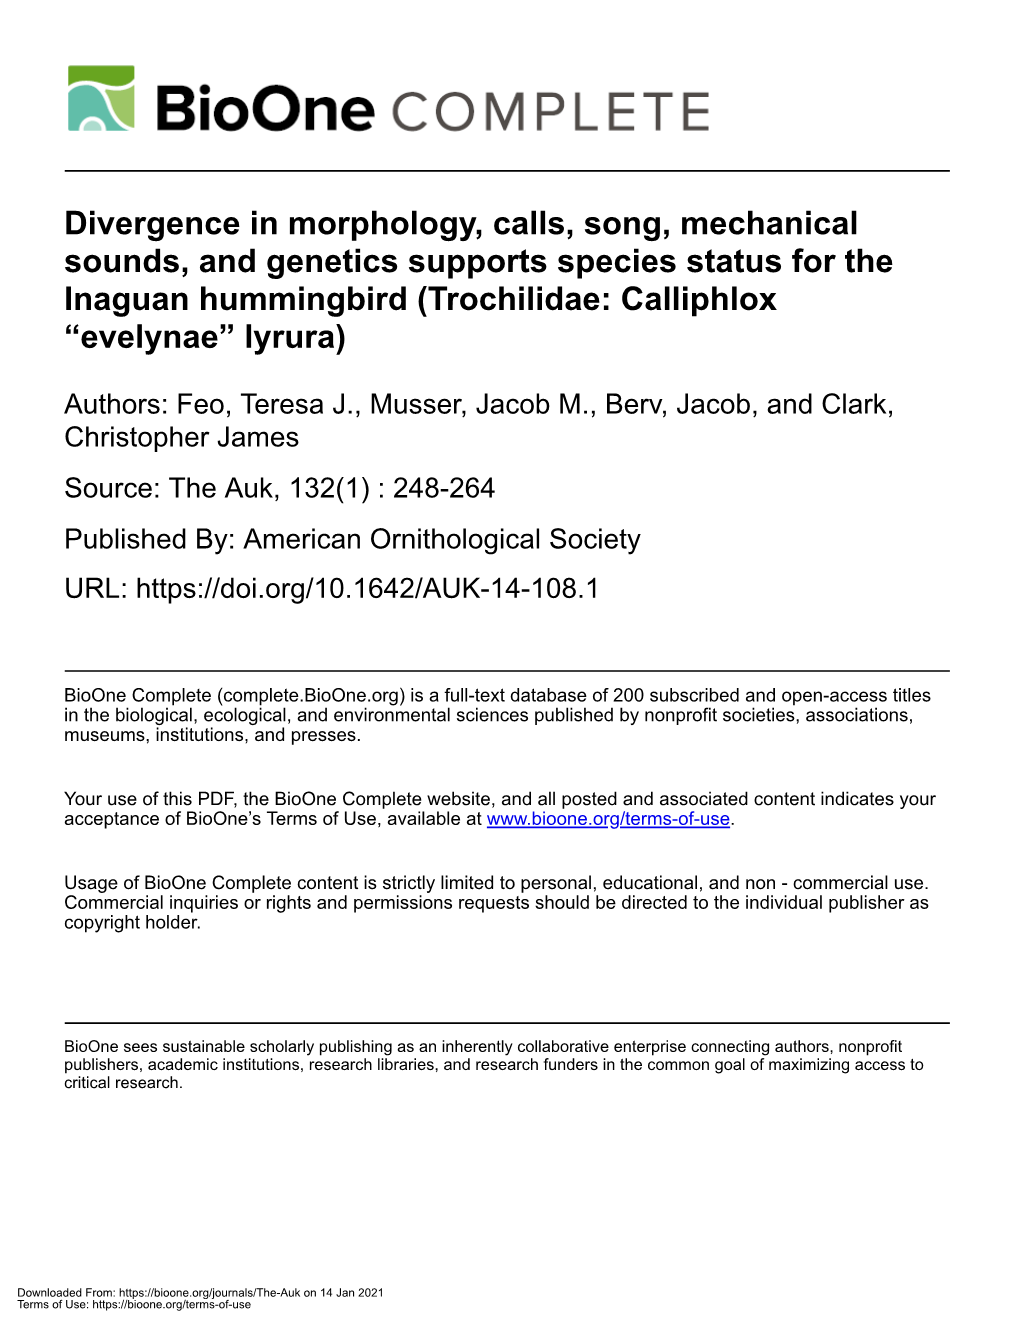 Divergence in Morphology, Calls, Song, Mechanical Sounds, and Genetics Supports Species Status for the Inaguan Hummingbird (Trochilidae: Calliphlox “Evelynae” Lyrura)